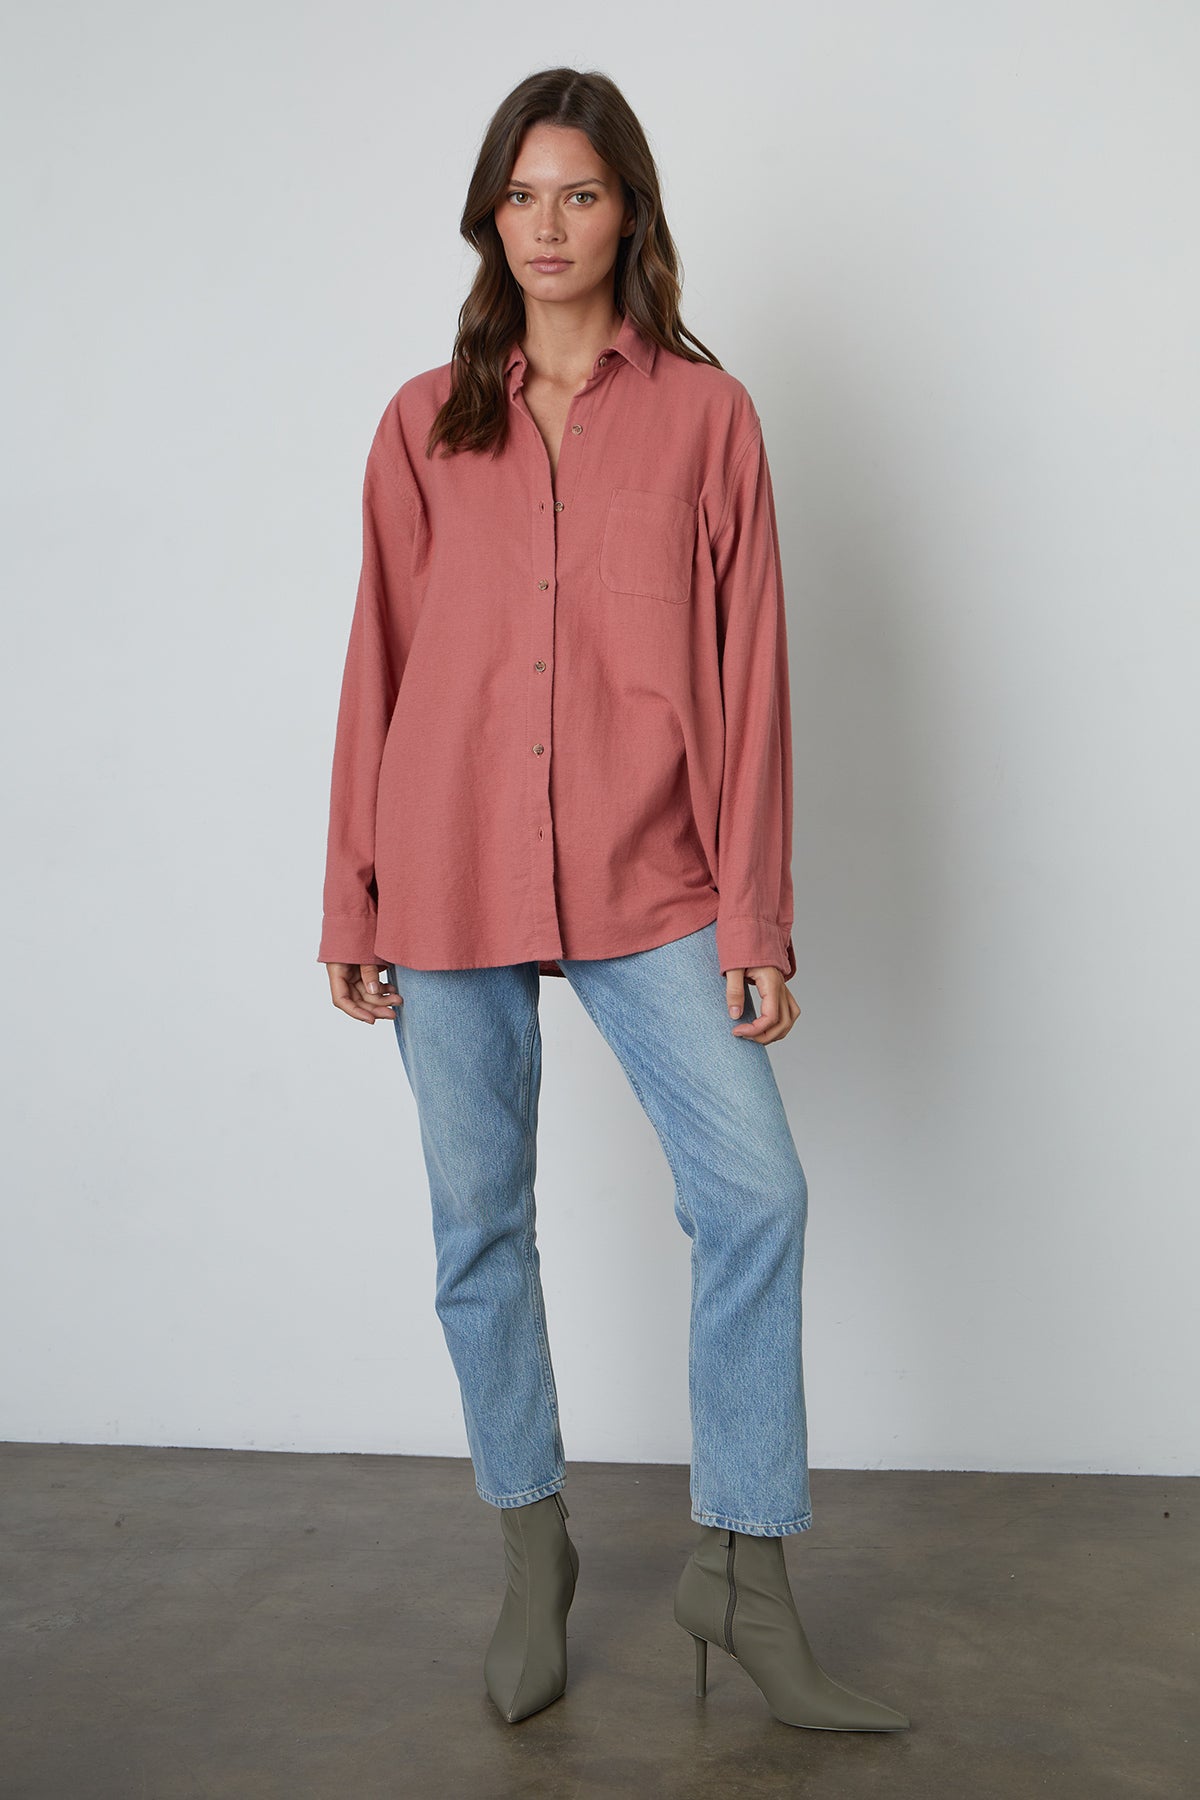 Chelsey Button-Up Shirt in Cranapple colored flannel front with light blue denim-25052998336705